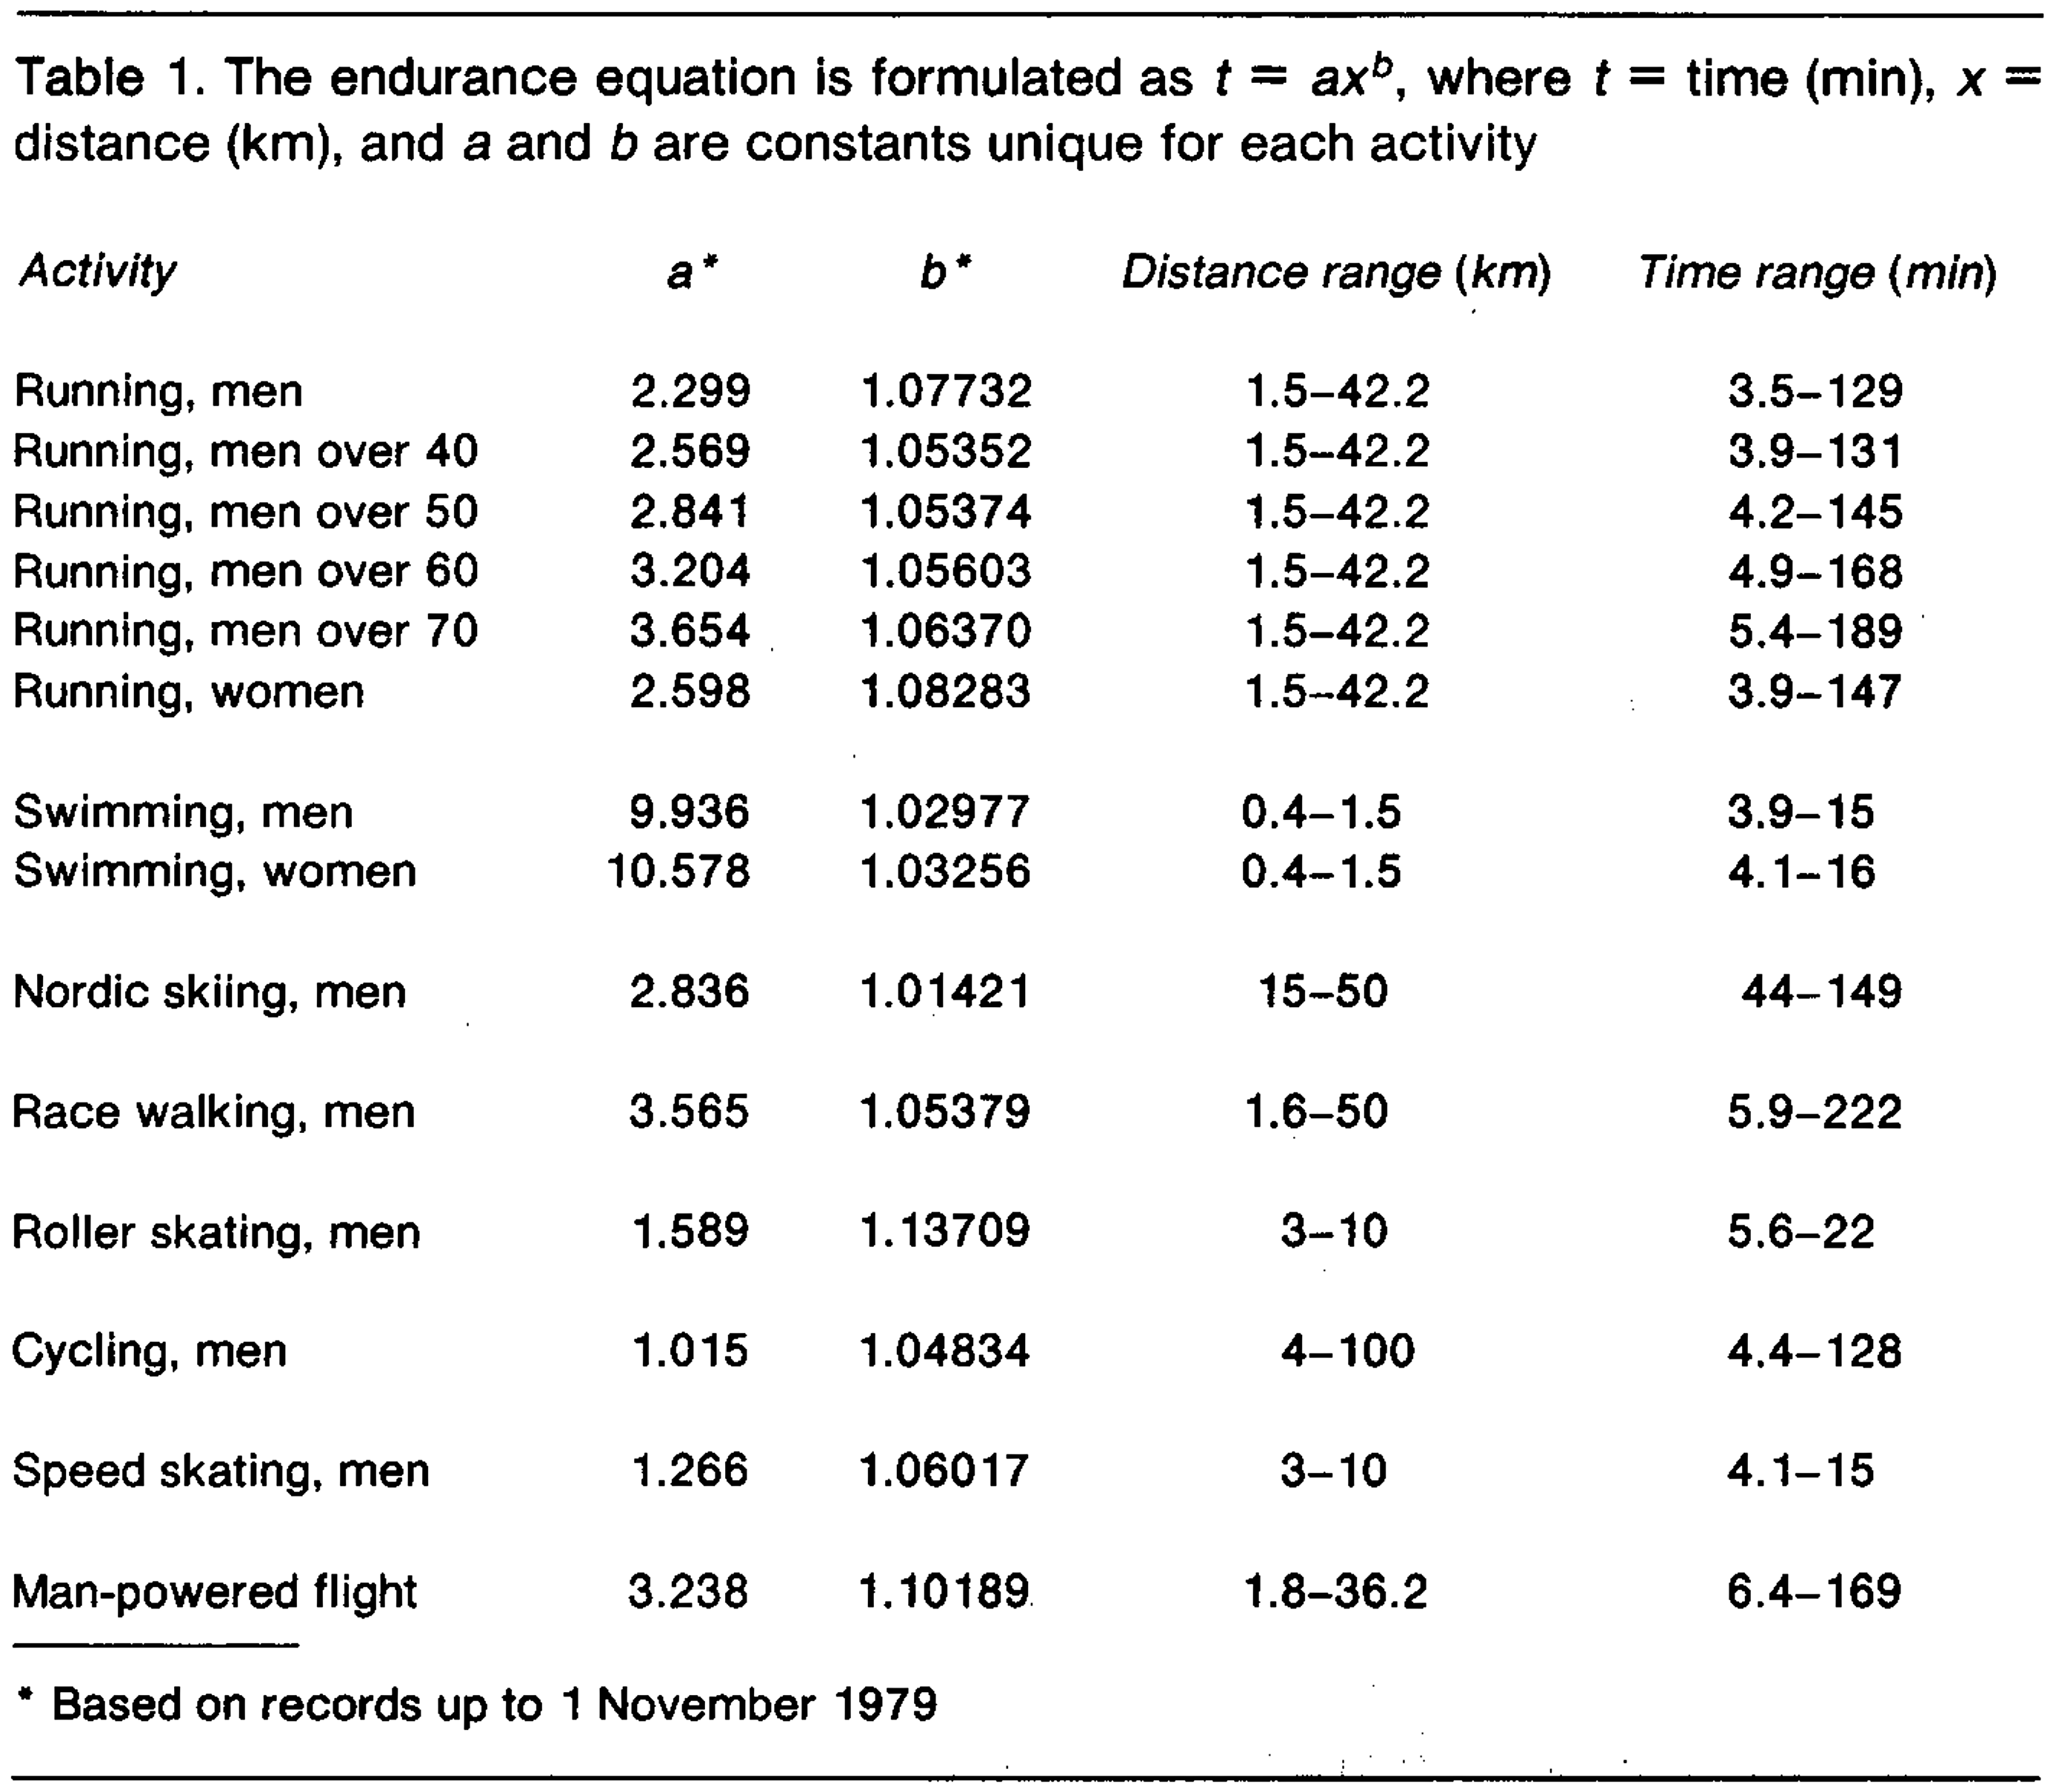 Table 1 from Riegel's paper <em>Athletic Records and Human Endurance</em>.